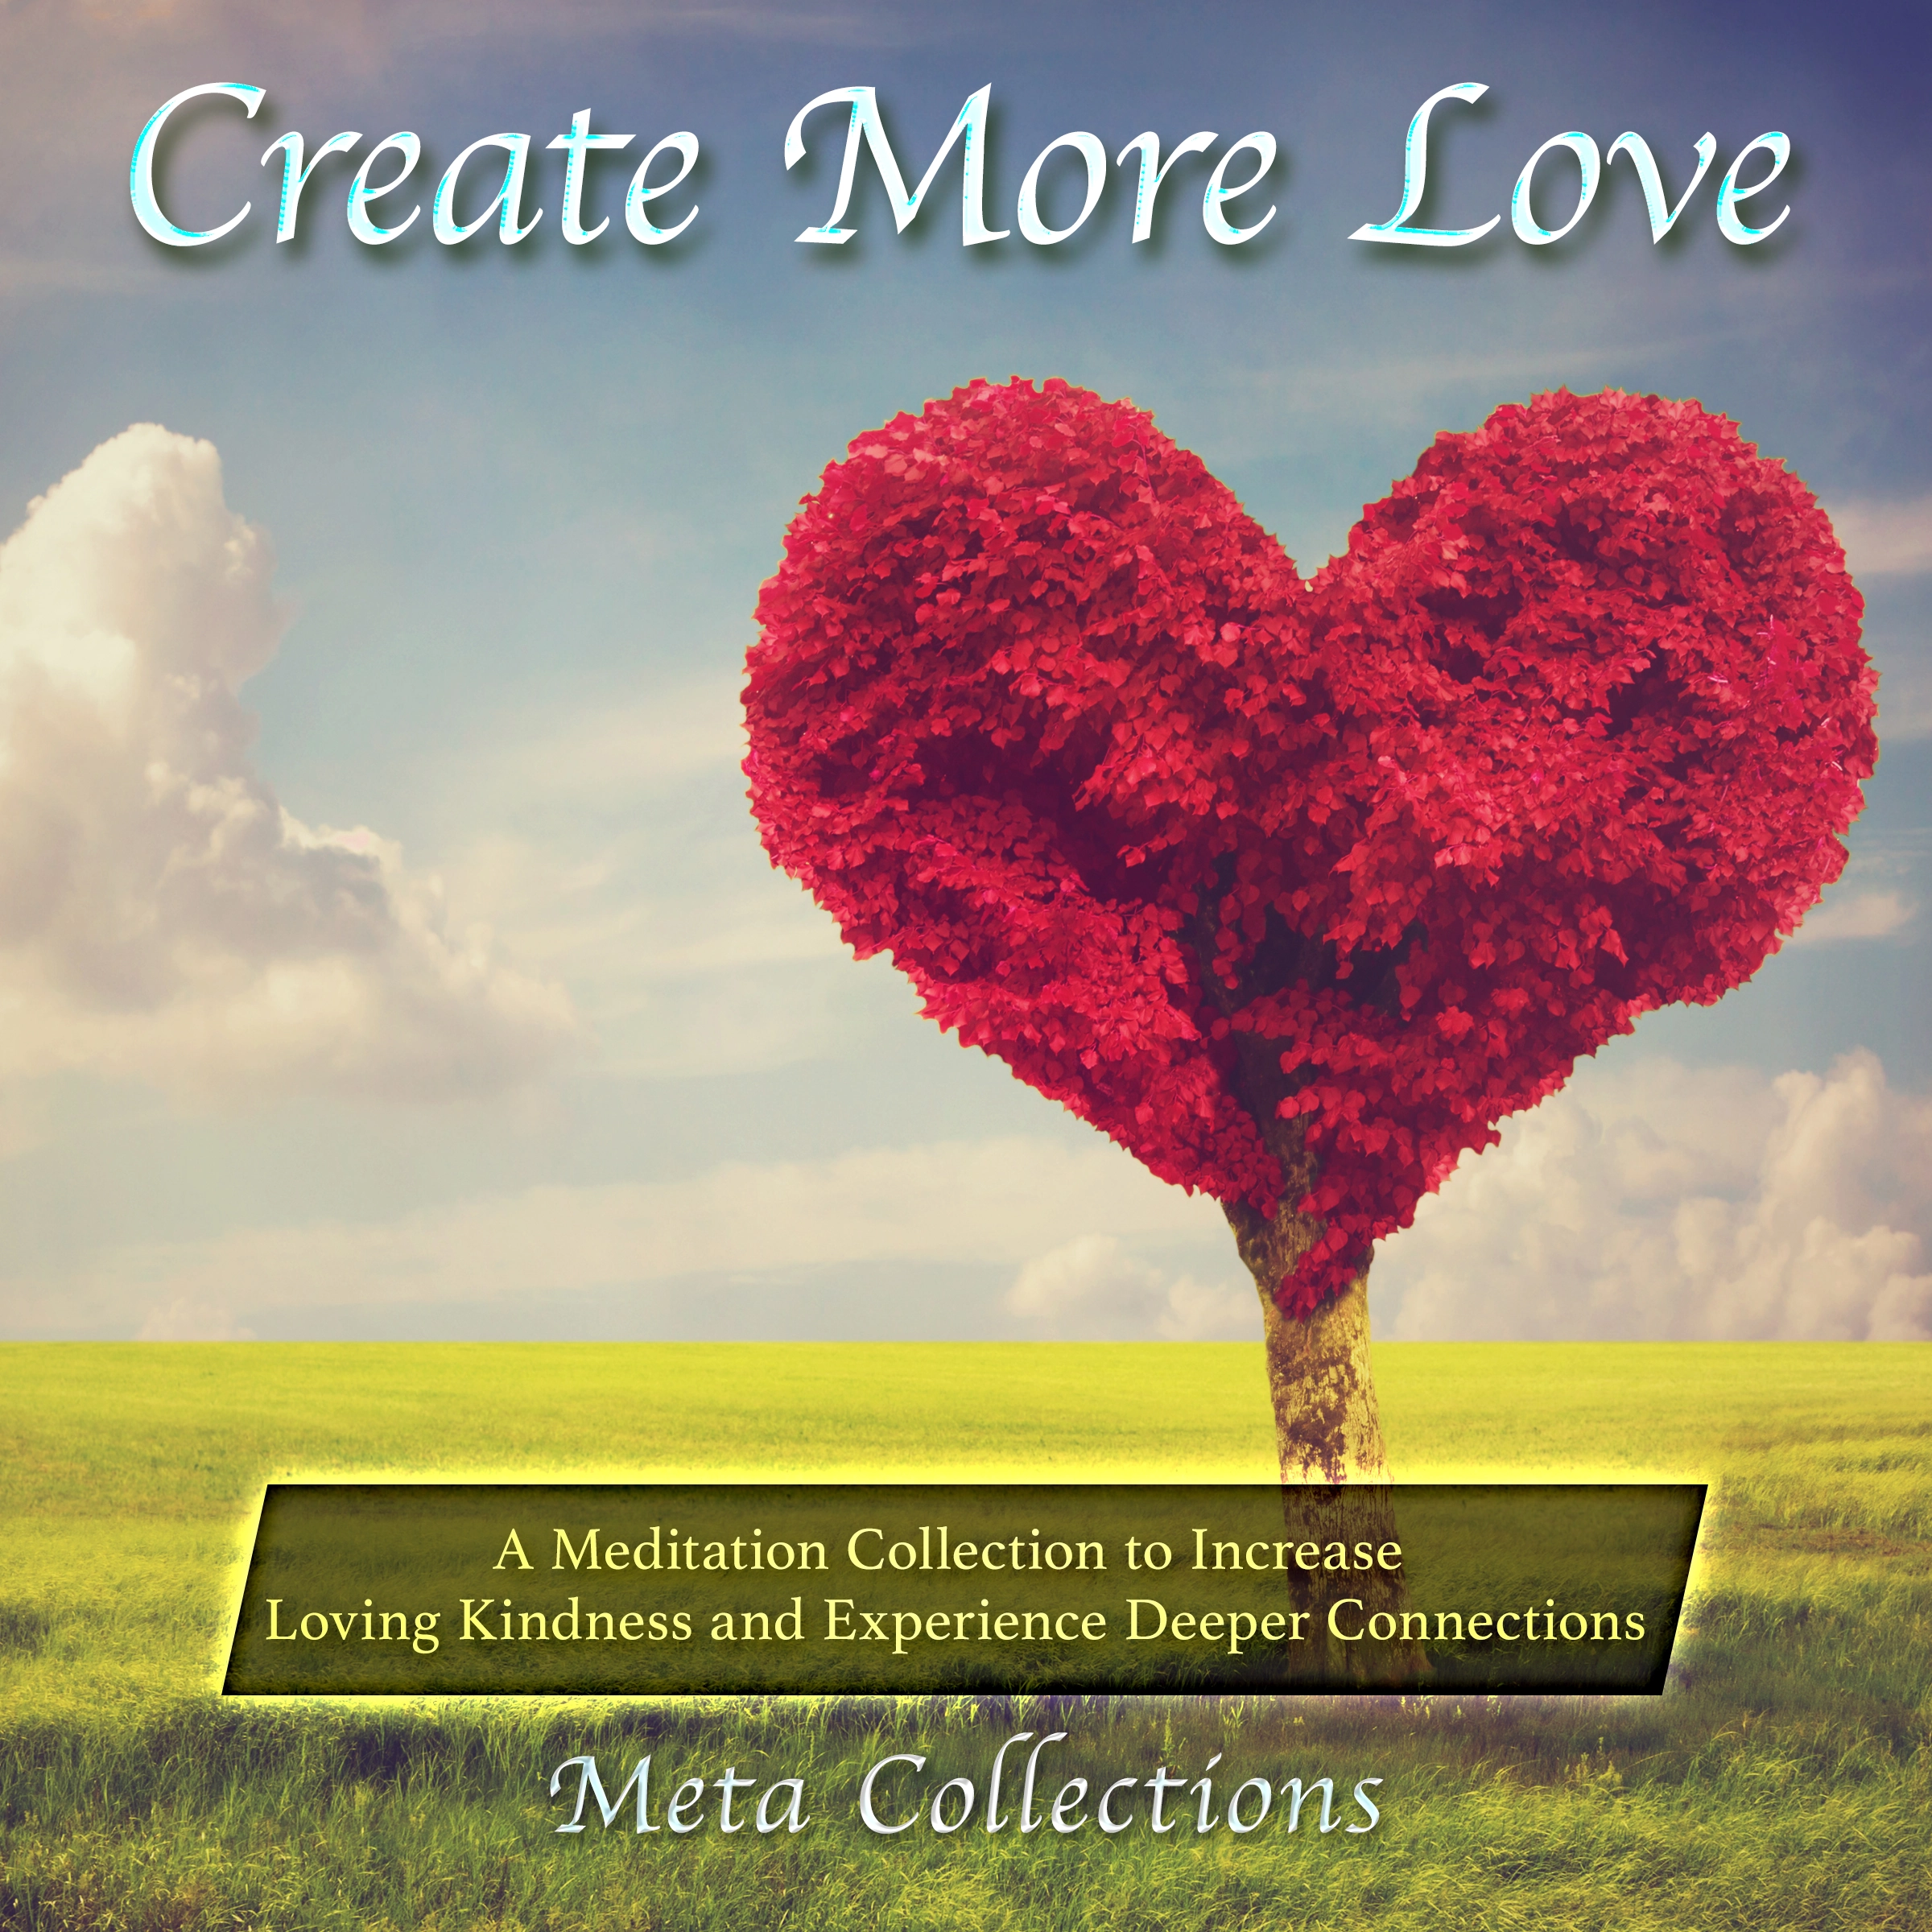 Create More Love: A Meditation Collection to Increase Loving Kindness and Experience Deeper Connections Audiobook by Meta Collections